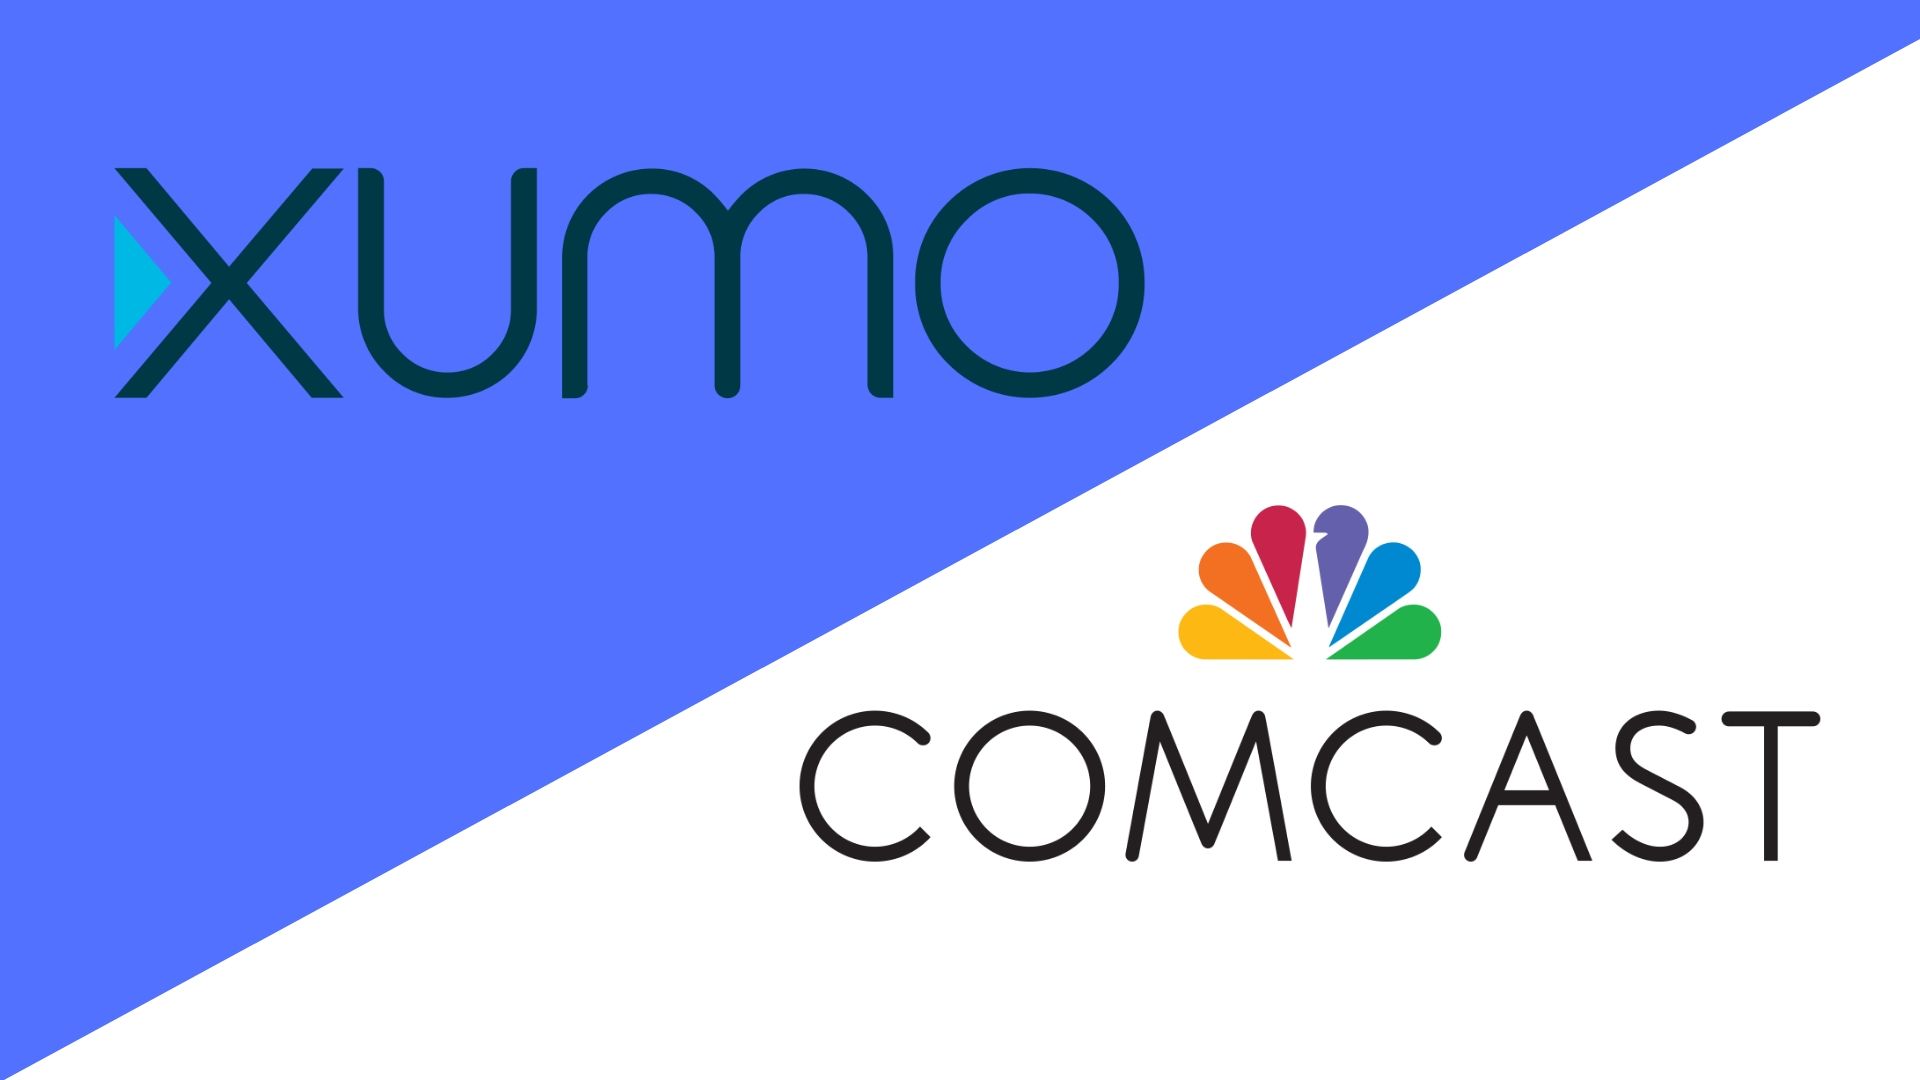 Comcast acquires Xumo, NBCUniversal Opens New Local Ads Business for Streaming TV and other top news